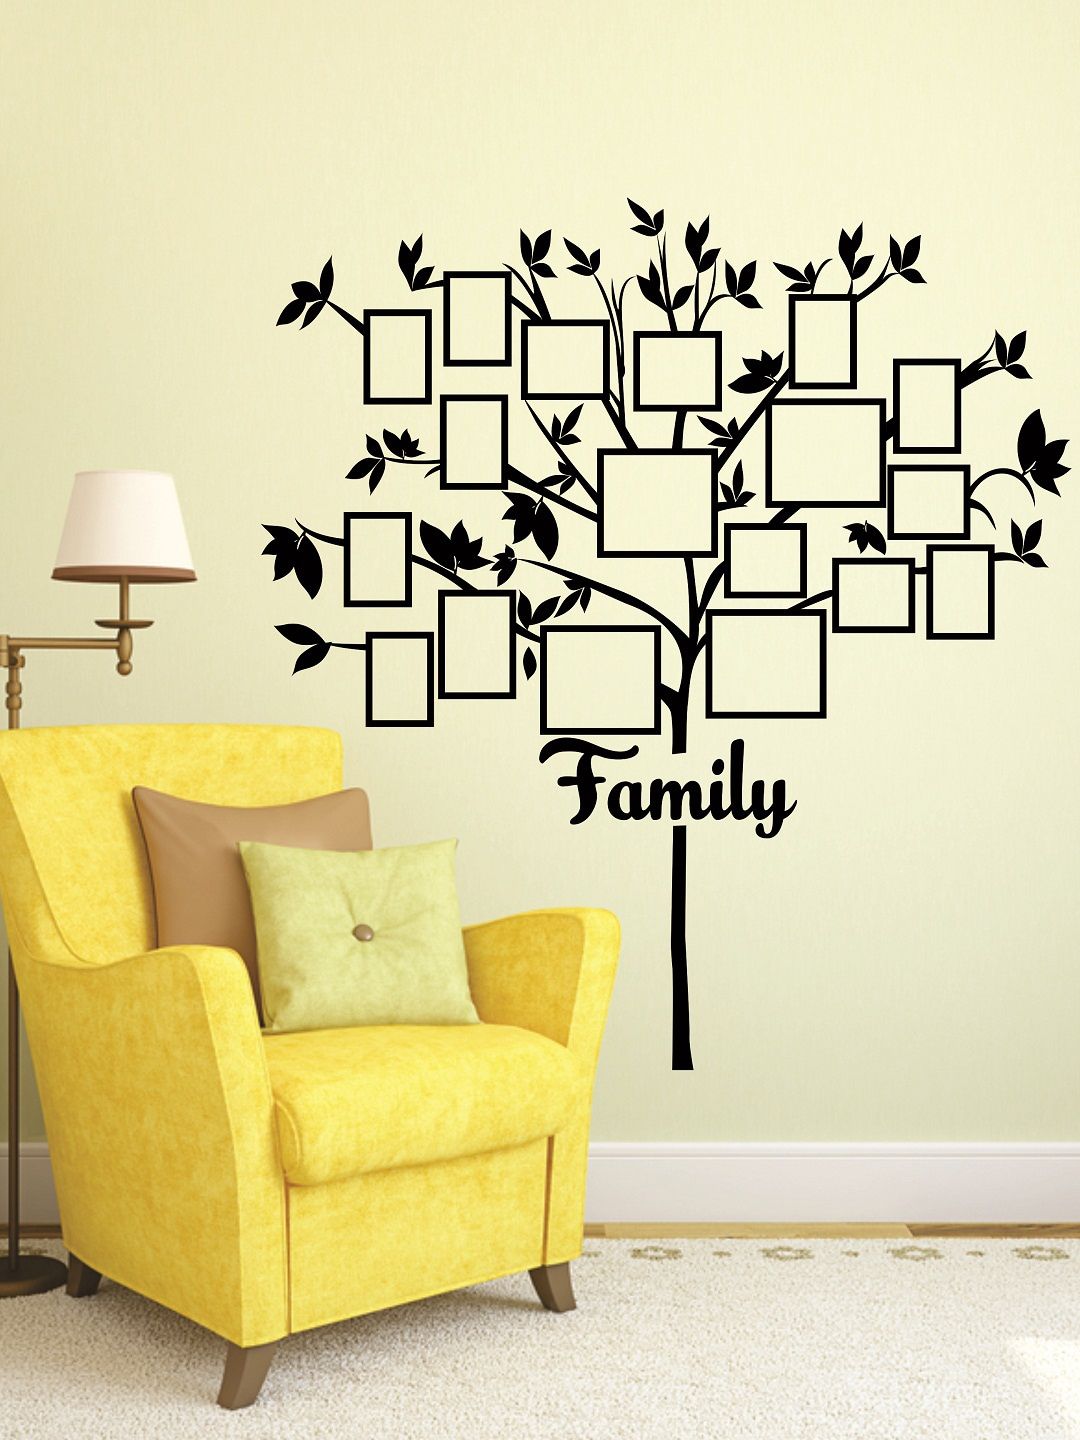 WALLSTICK Black Family Tree Large Vinyl Wall Sticker Price in India